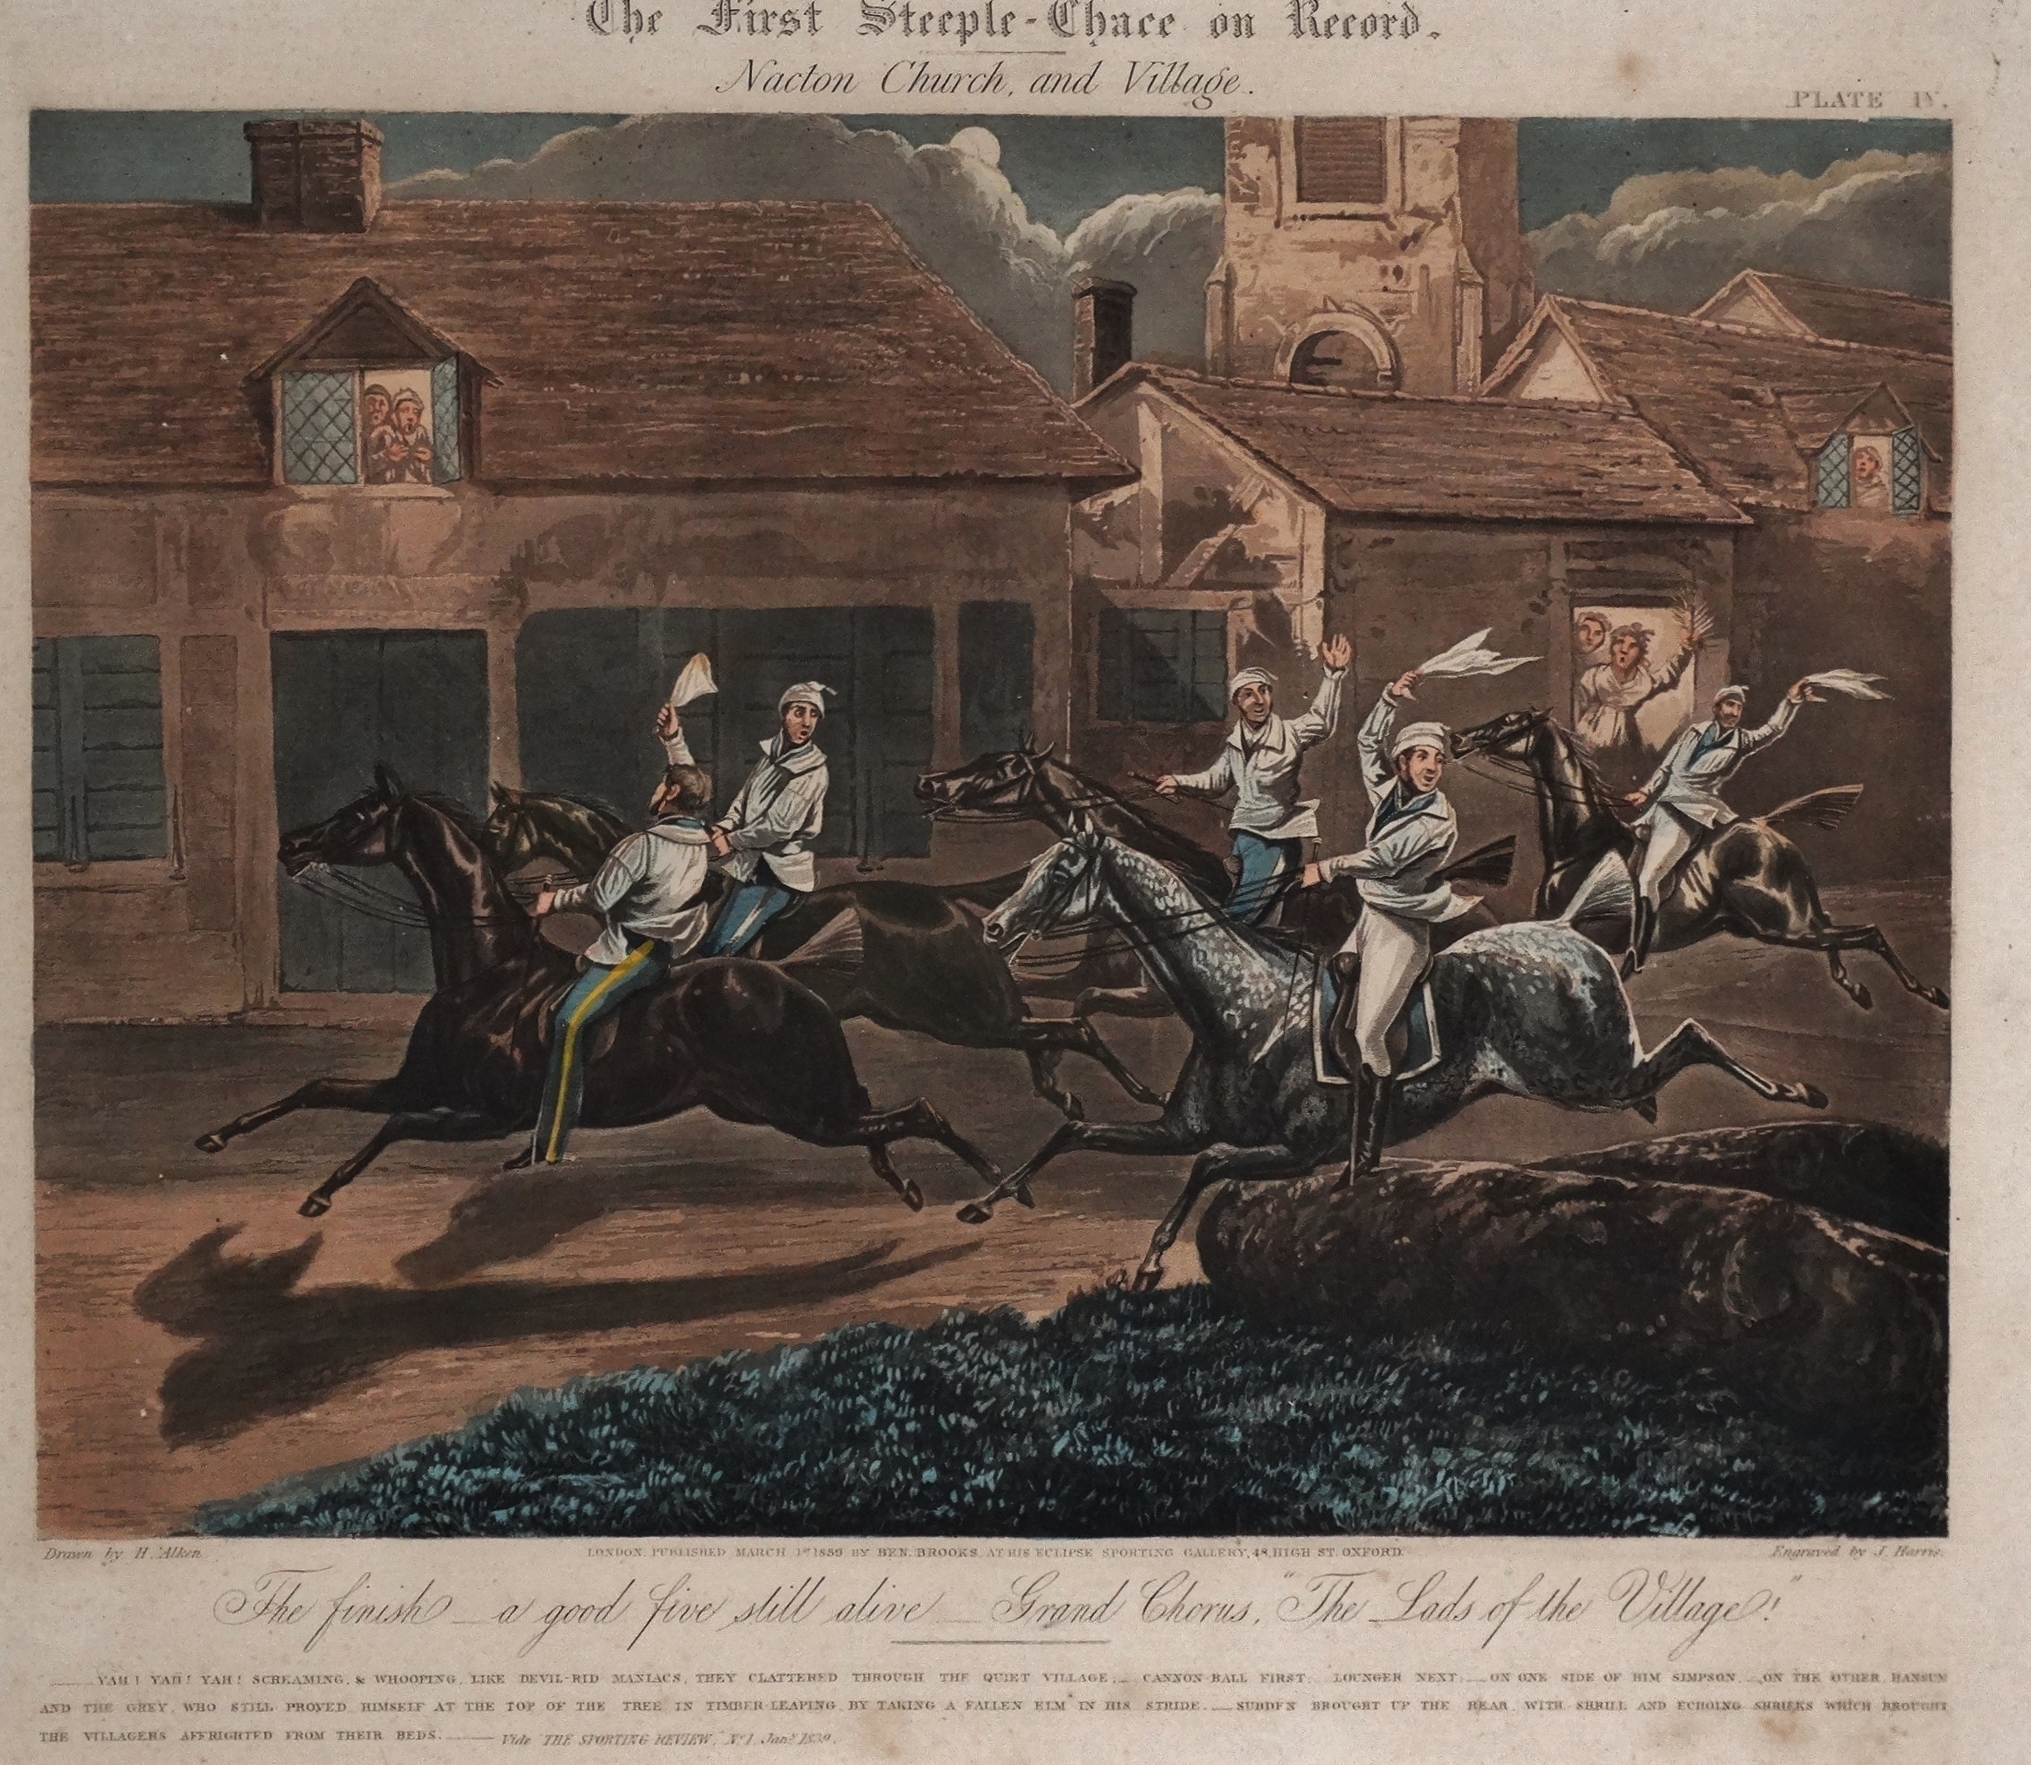 J. HARRIS after H. Alken A set of four hand coloured engravings The First Steeple-Chase on Record, - Image 5 of 5